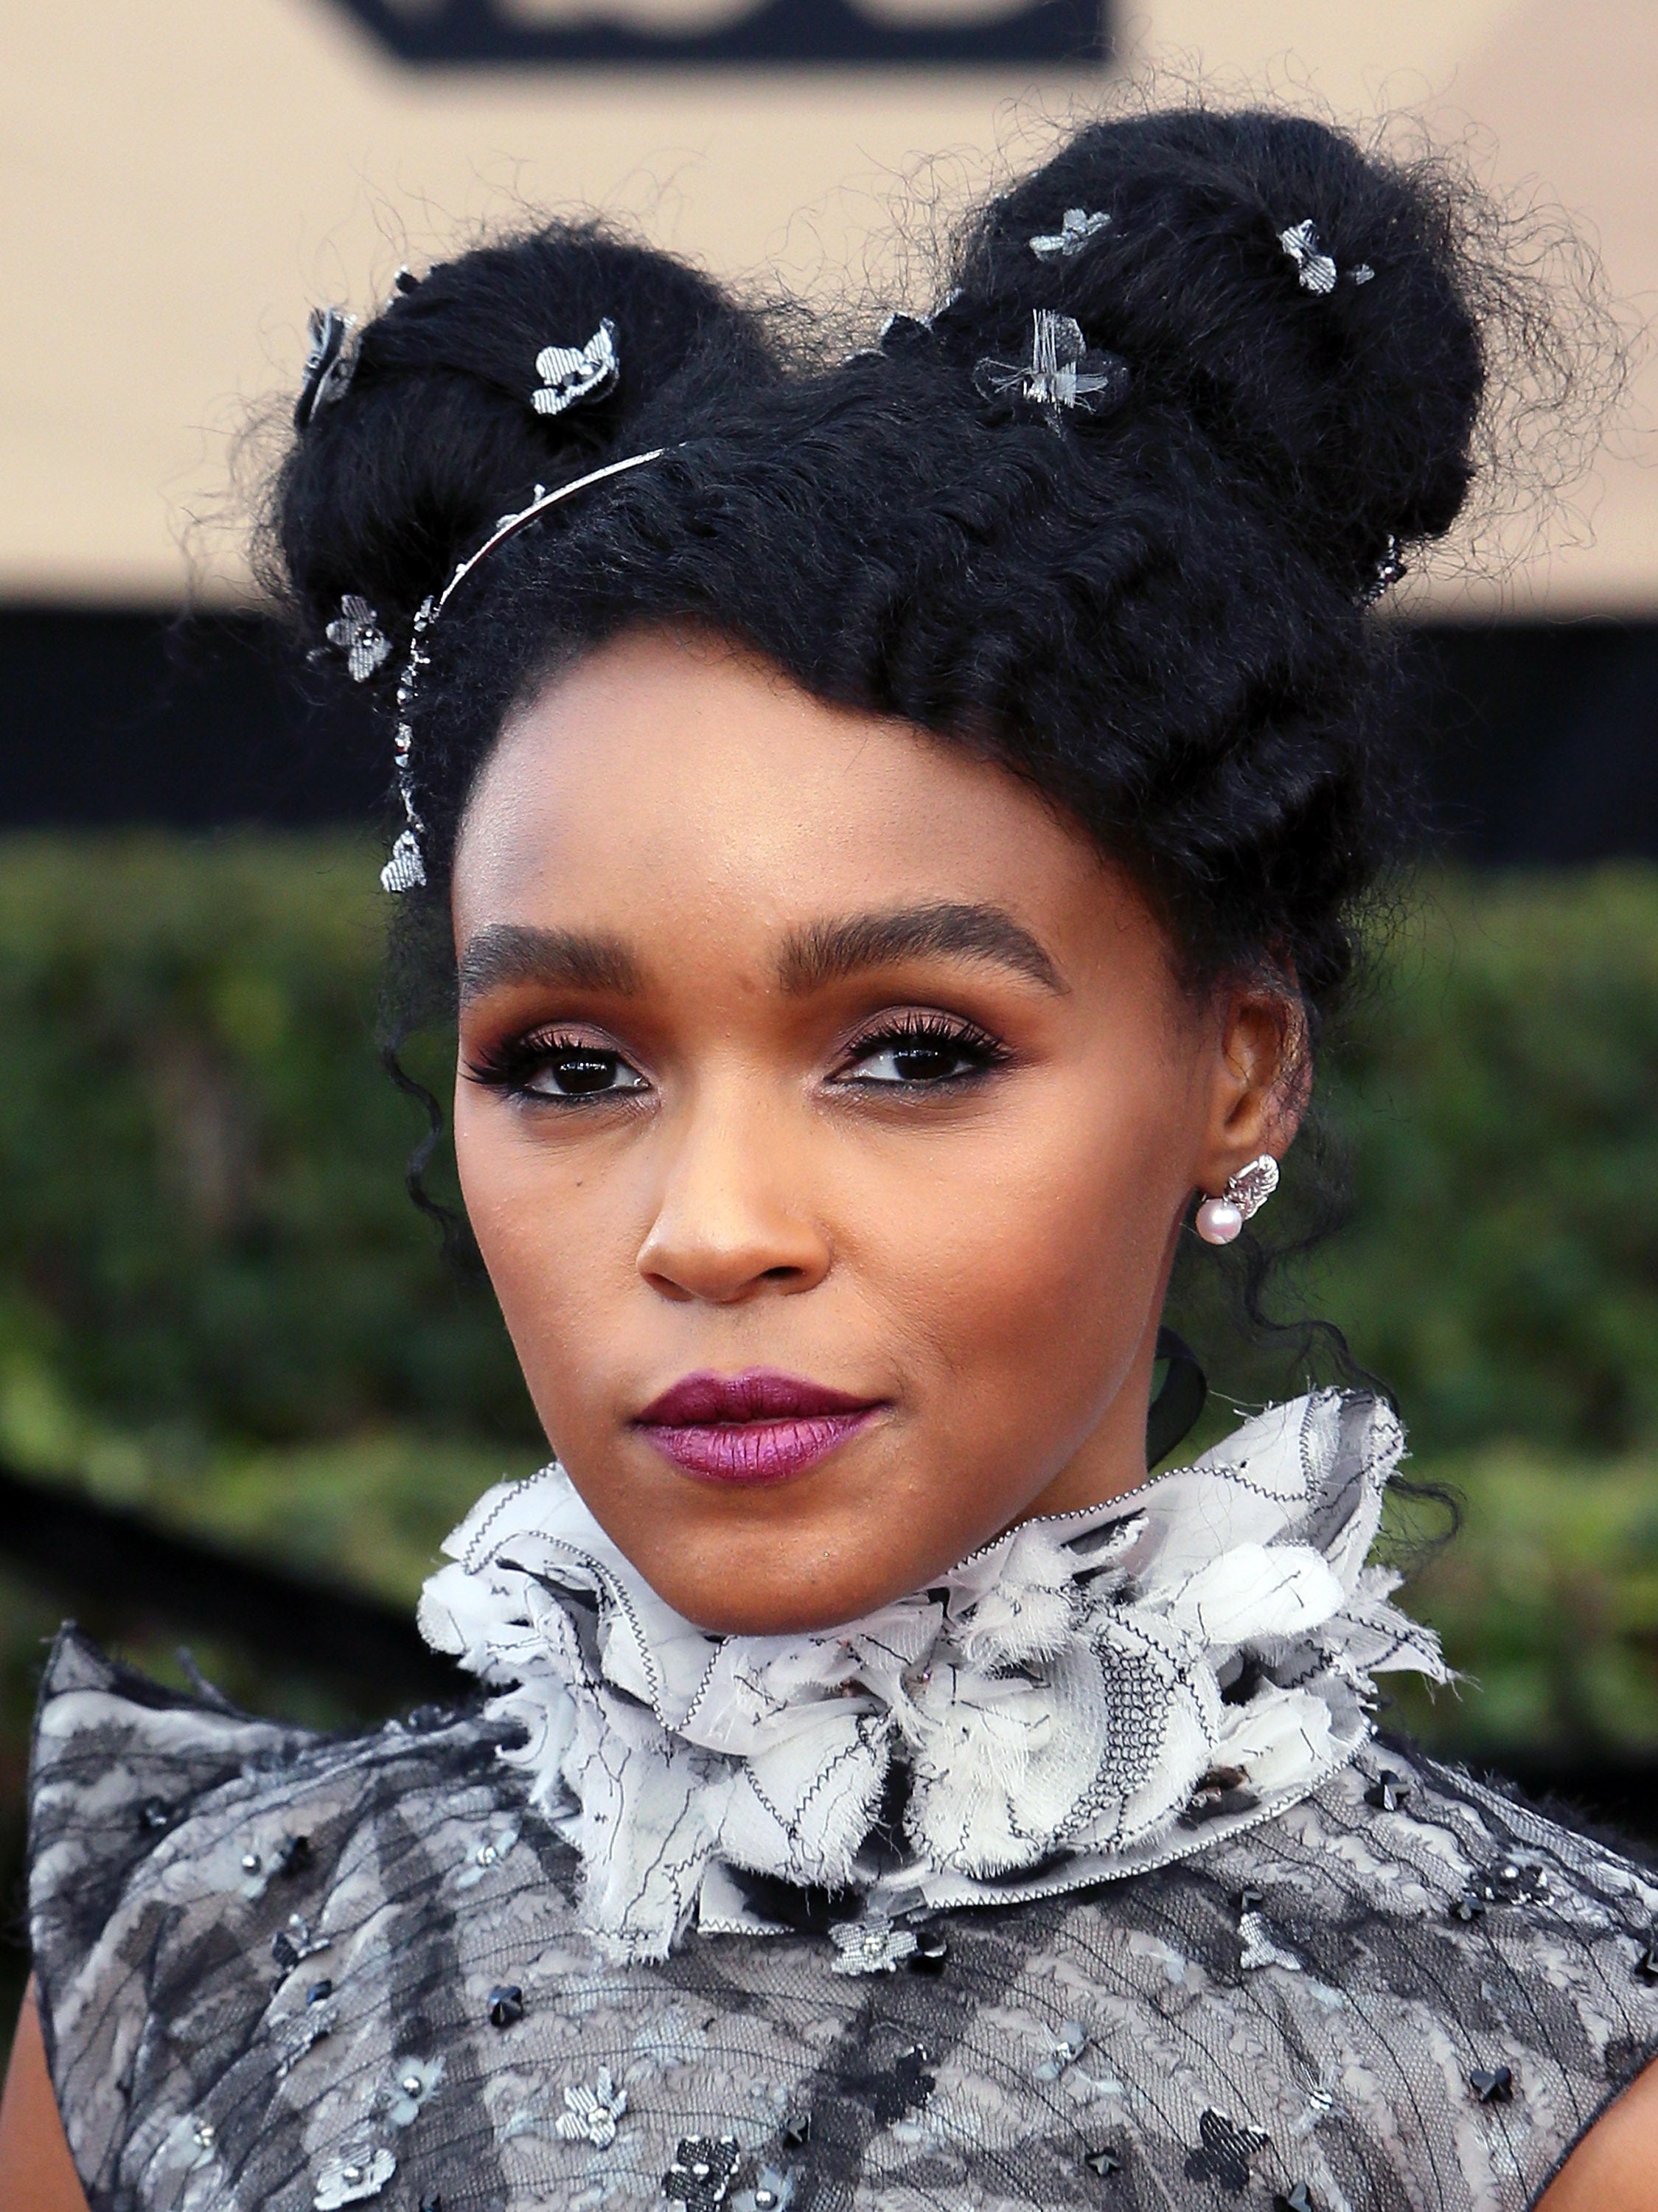 Janelle Monáe's Accessorized Hairstyles Continue To Win Awards Season
